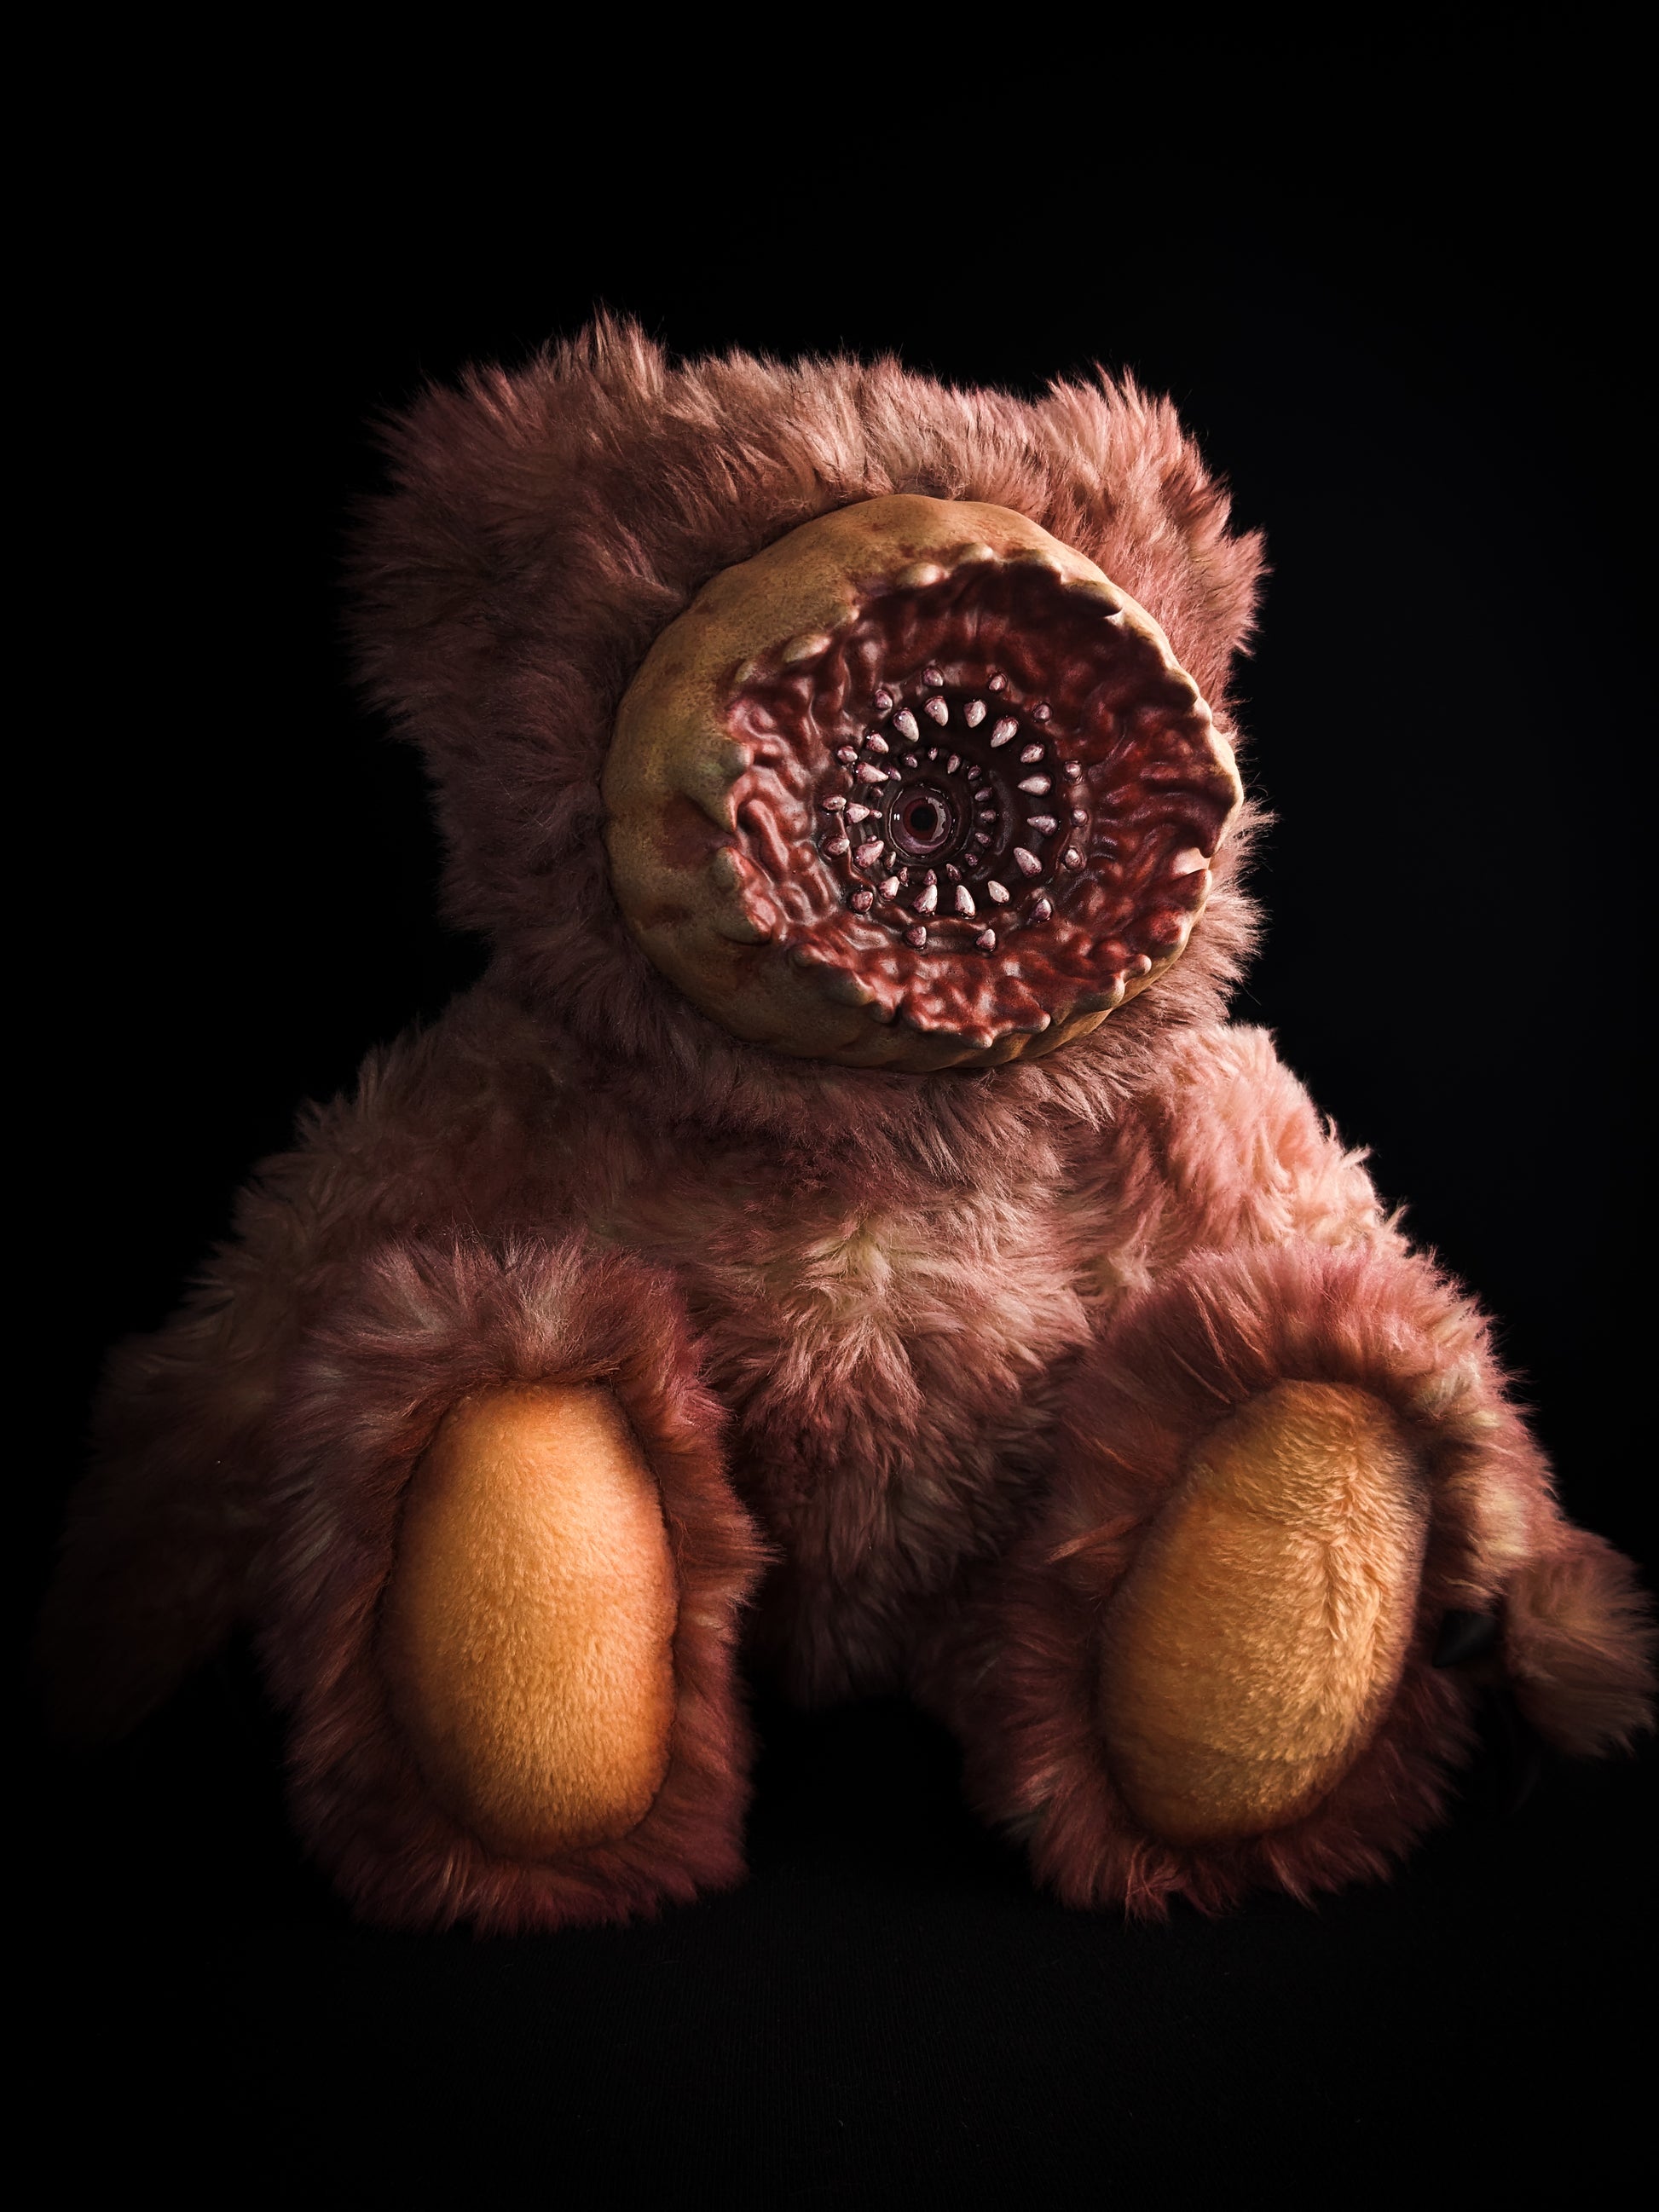 Monstrous Mutation: URCHIN - CRYPTCRITS Handcrafted Gory Mutant Monster Art Doll Plush Toy for Macabre Mavens